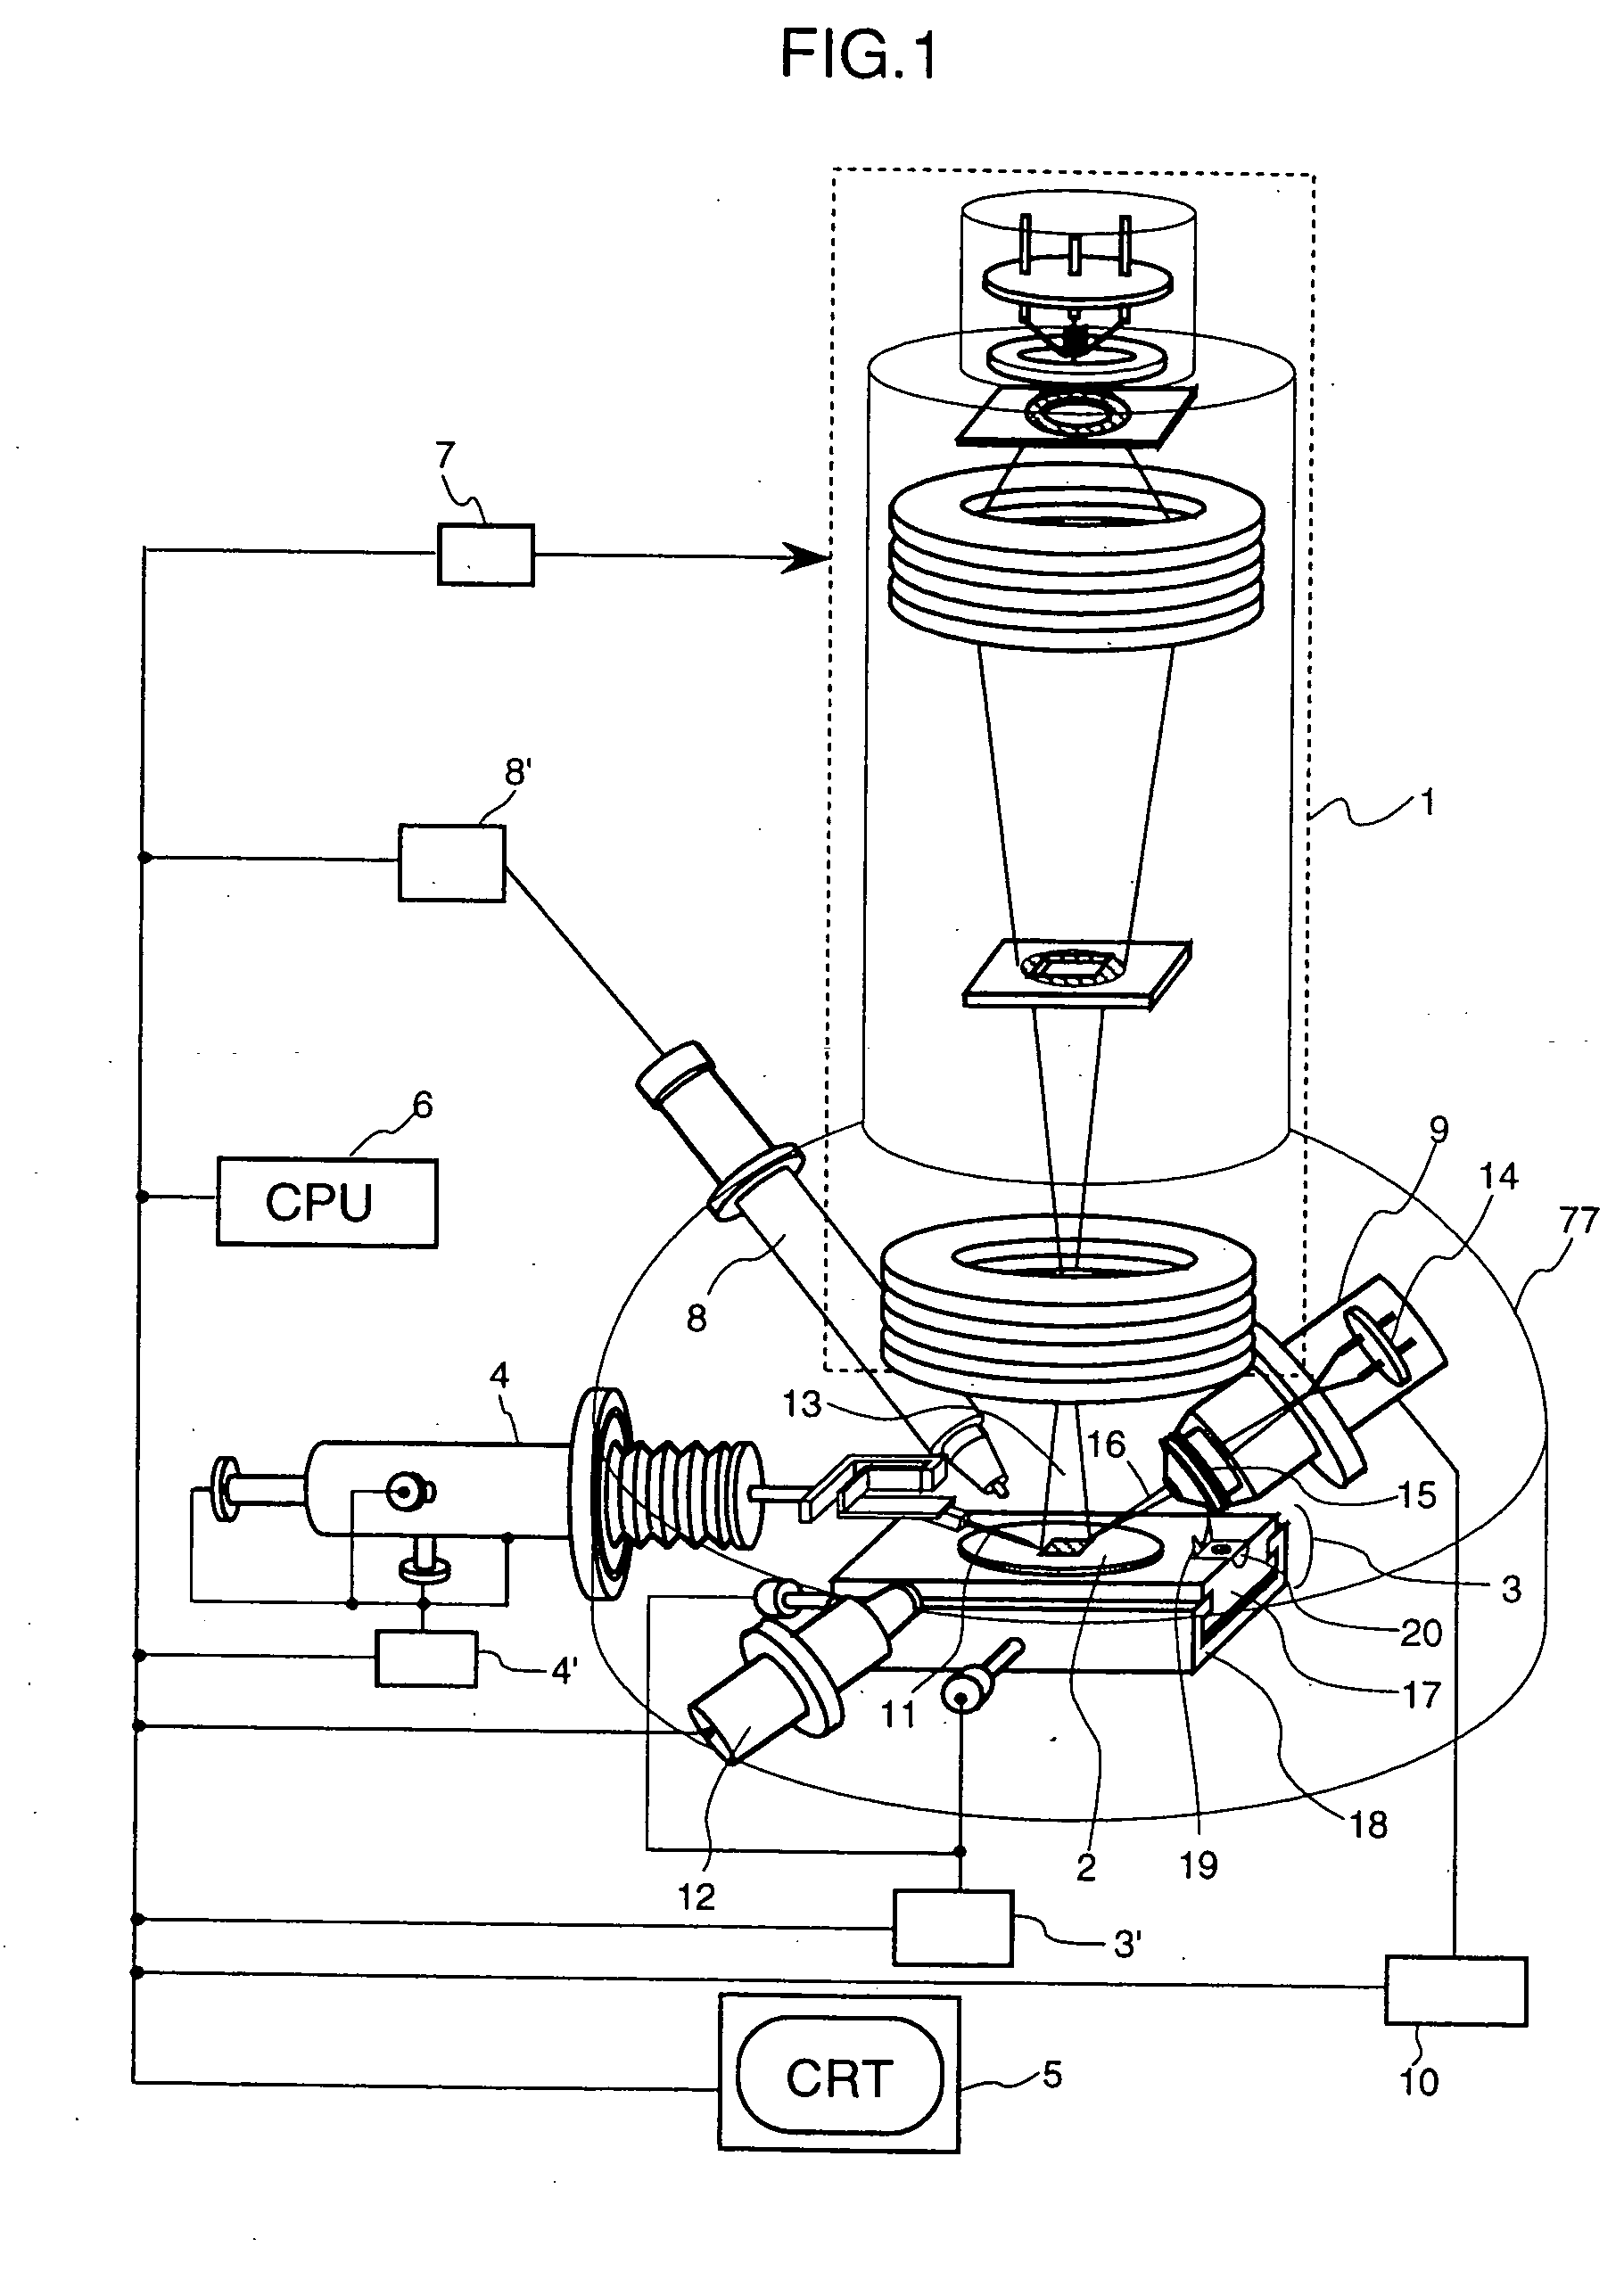 Method and apparatus for specimen fabrication